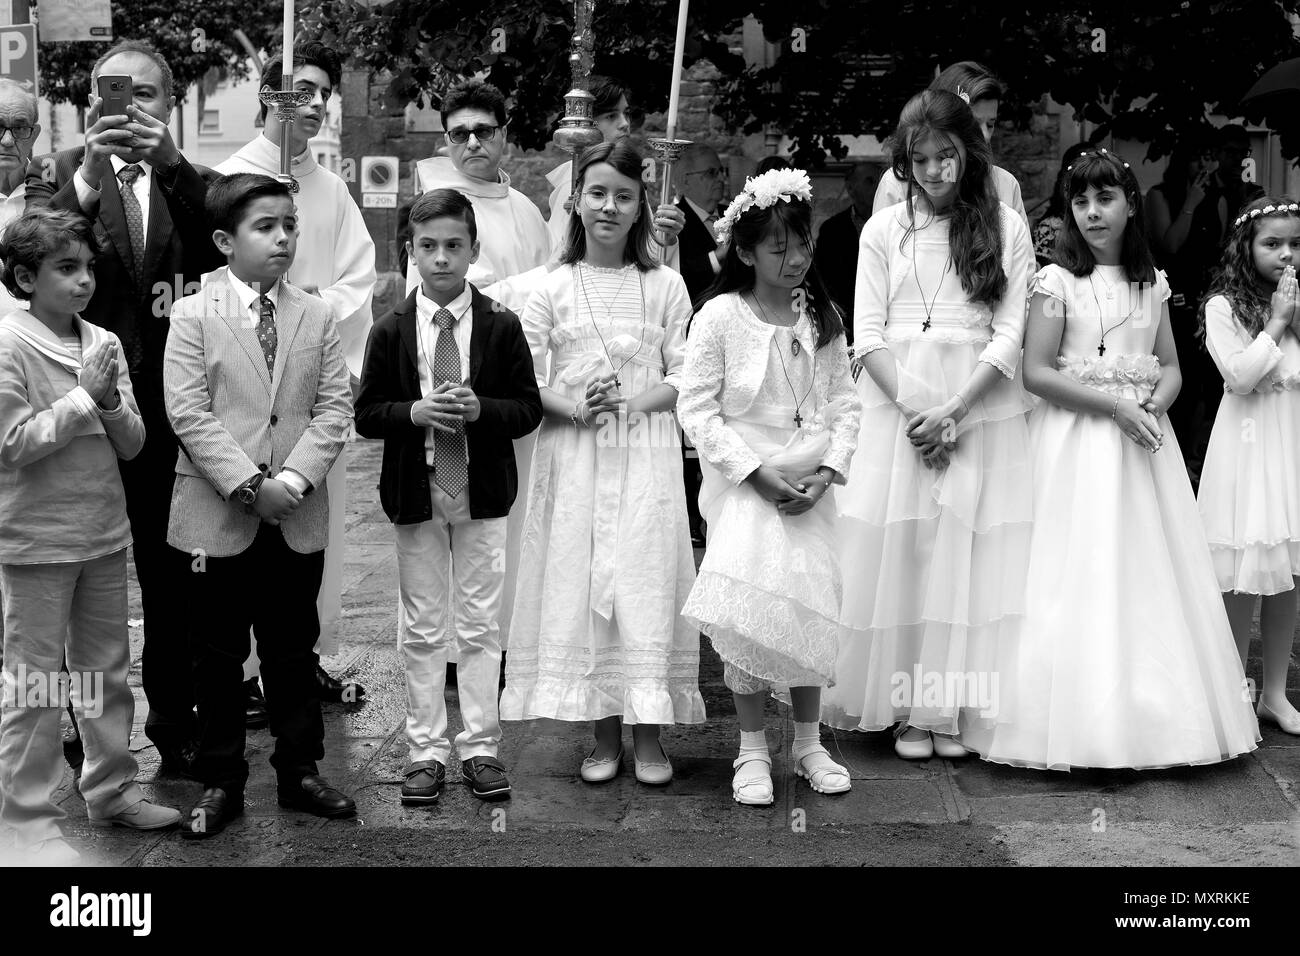 First communion boy Black and White Stock Photos & Images - Alamy